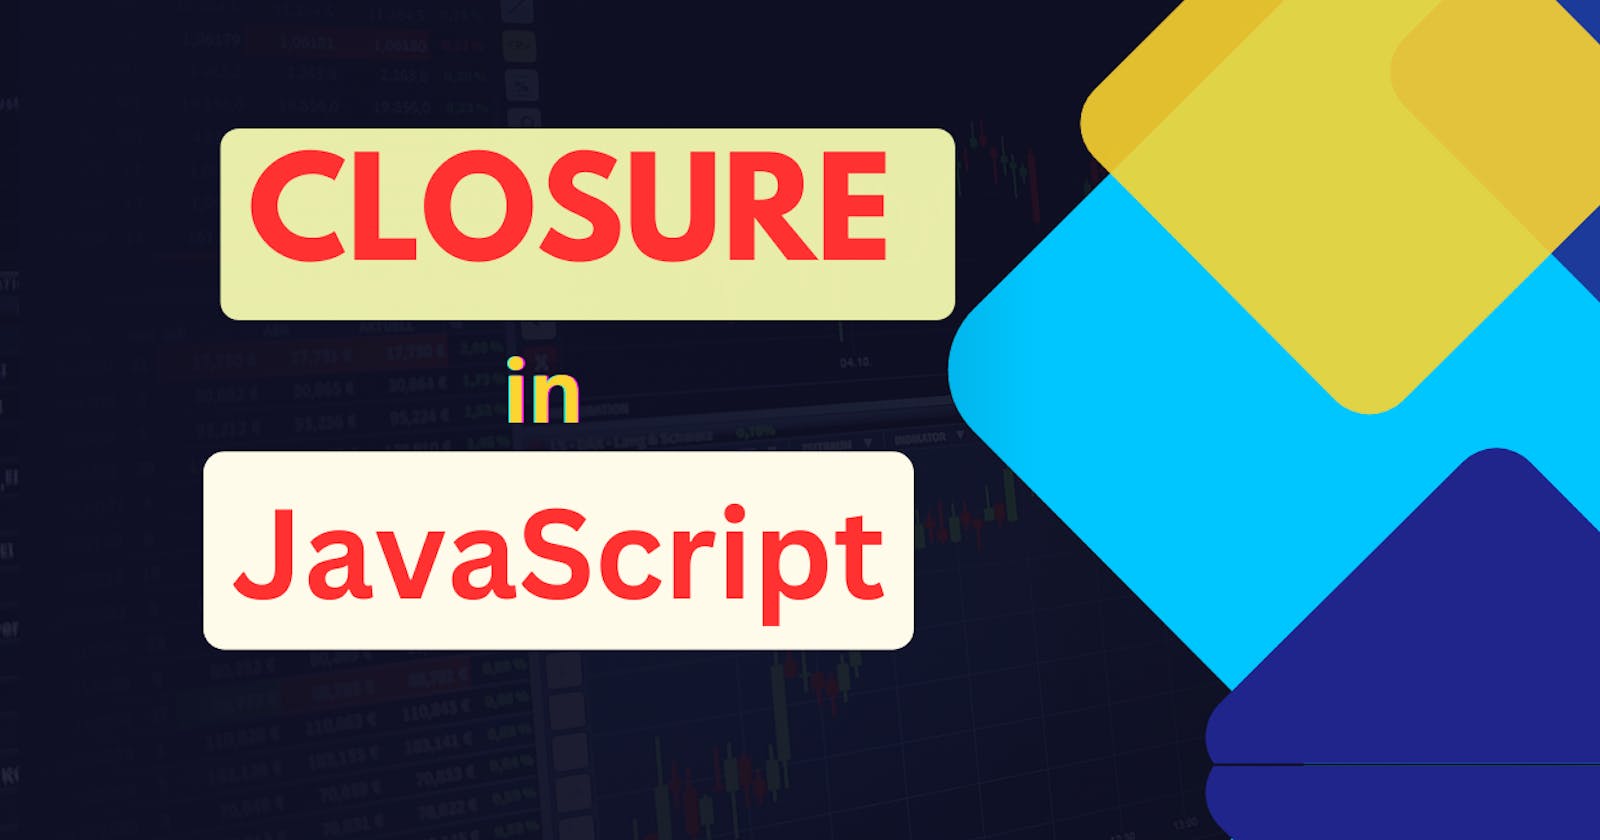 Learn  closure  in JavaScript with code